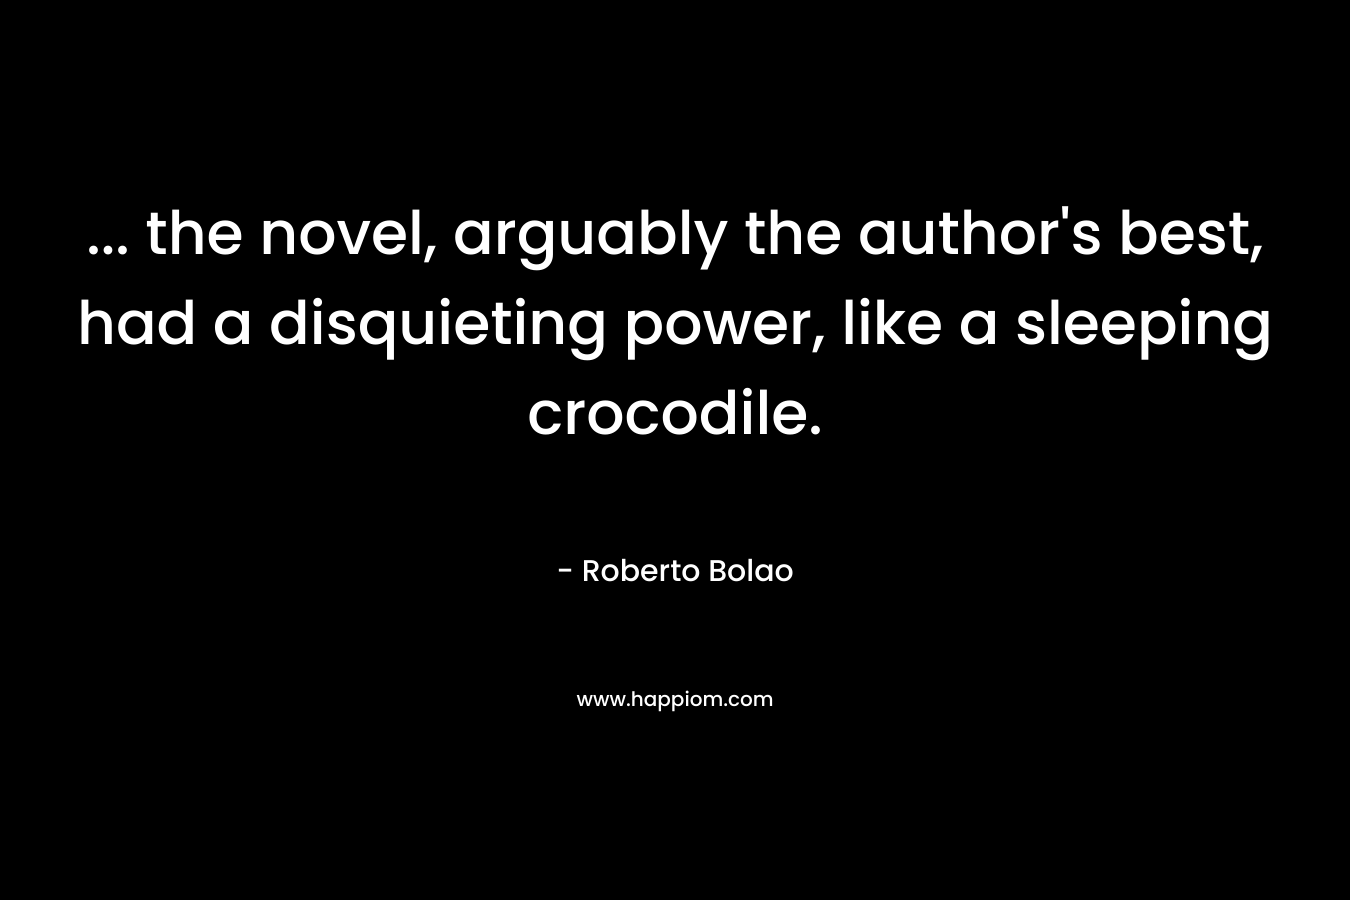 … the novel, arguably the author’s best, had a disquieting power, like a sleeping crocodile. – Roberto Bolao